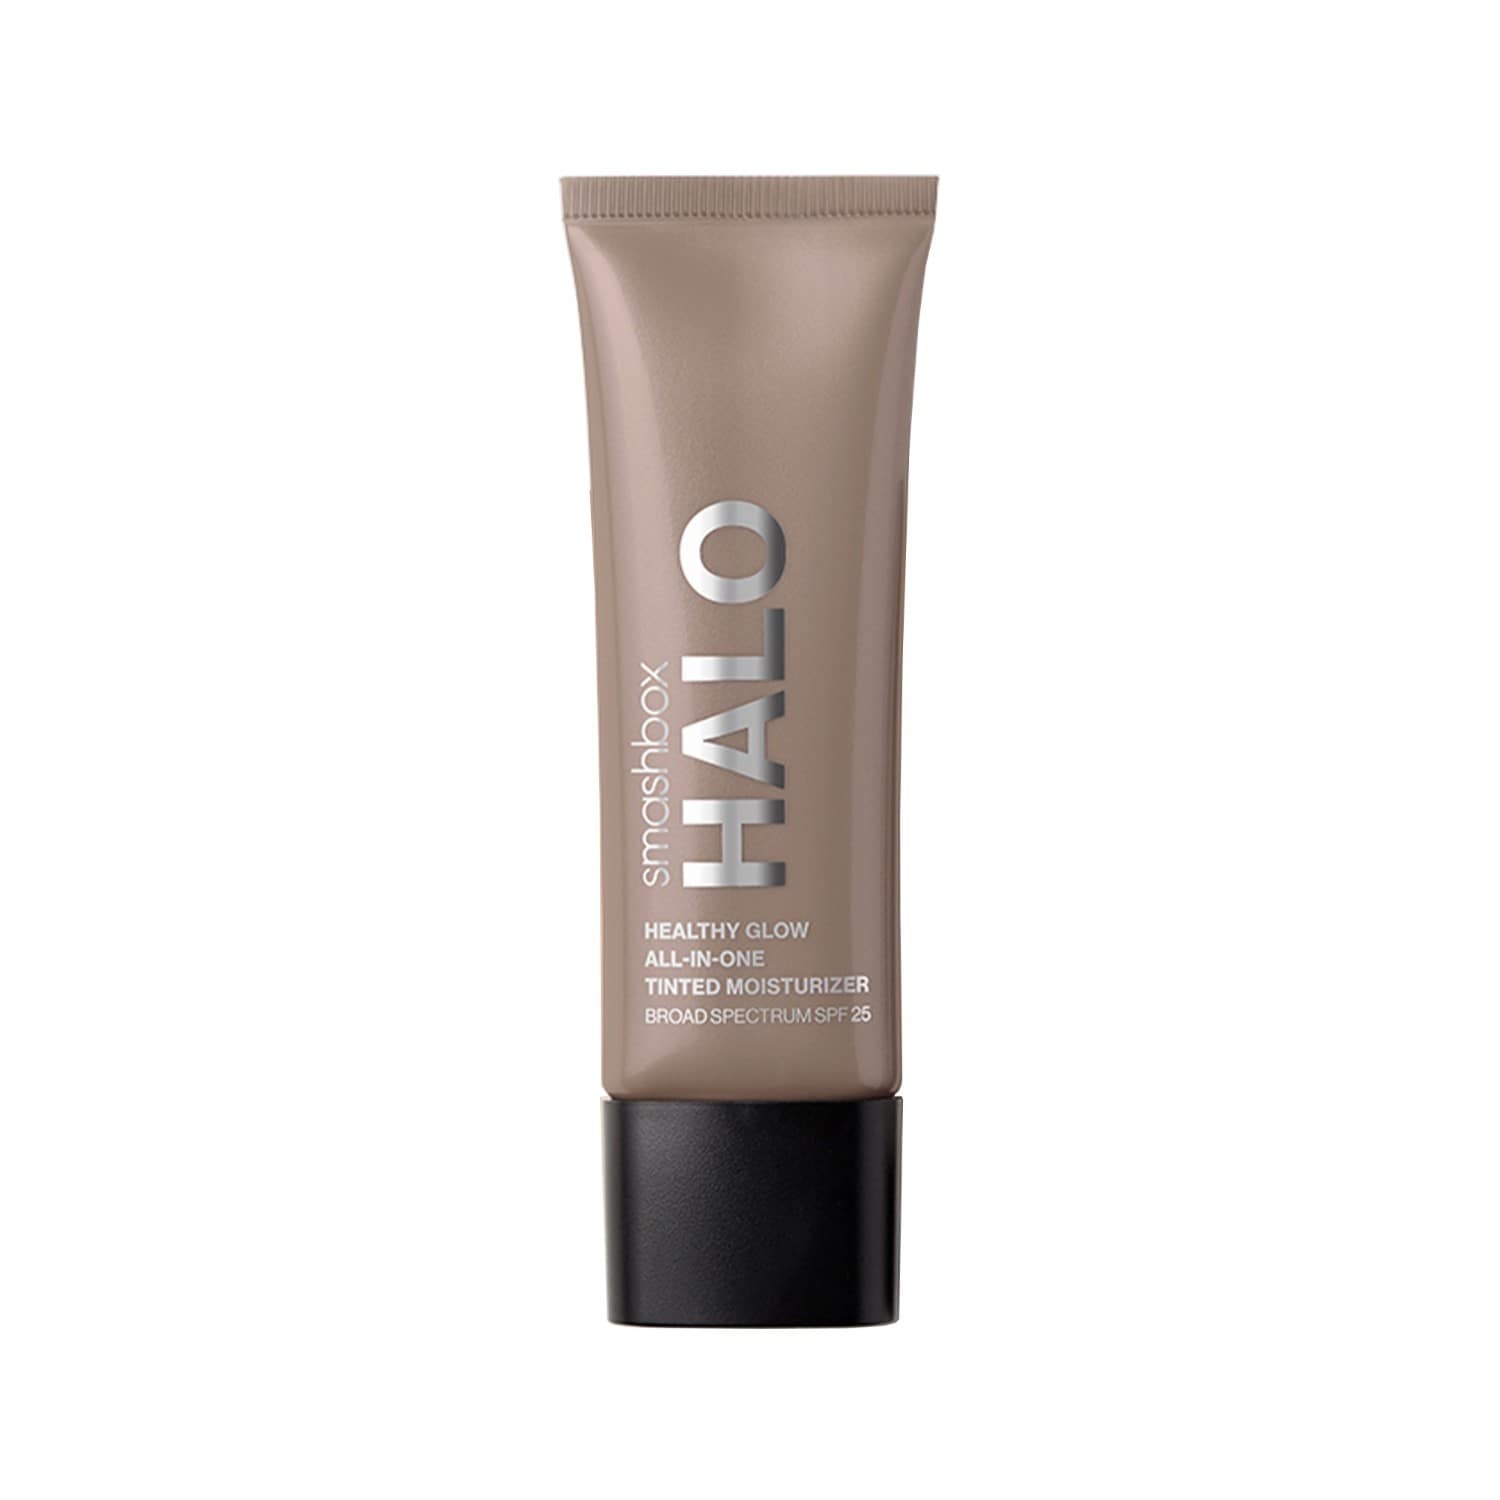 Smashbox Halo Healthy Glow All-in-One Tinted Moisturizer, Deep Golden